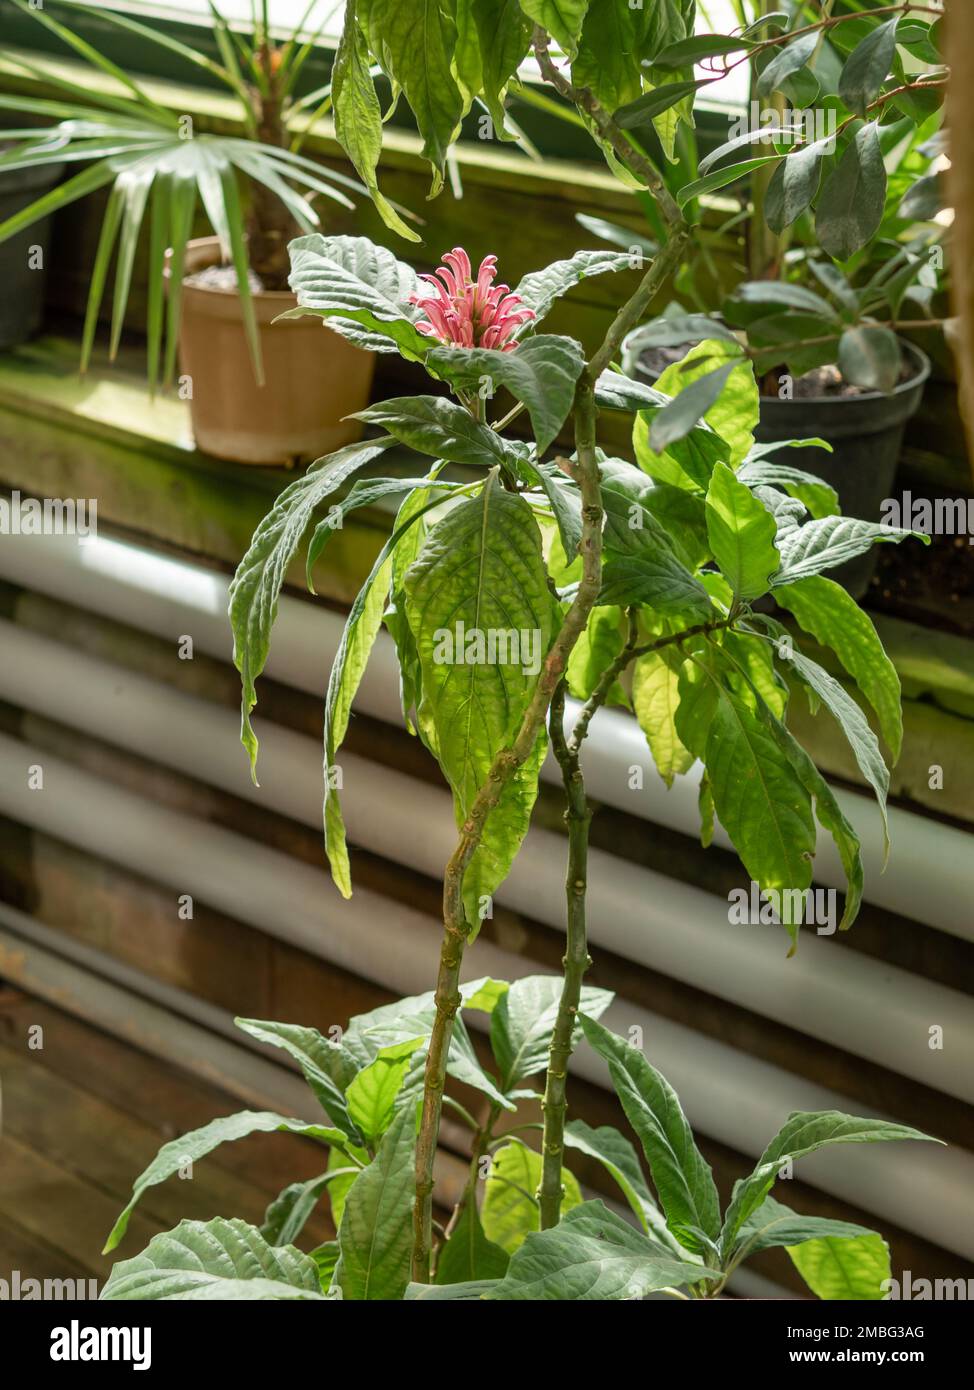 Pink flower of Justicia carnea or Brazilian plume flower. Blooming Brazilian-plume, flamingo flower or jacobinia, Flowering plant grows in greenhouse Stock Photo